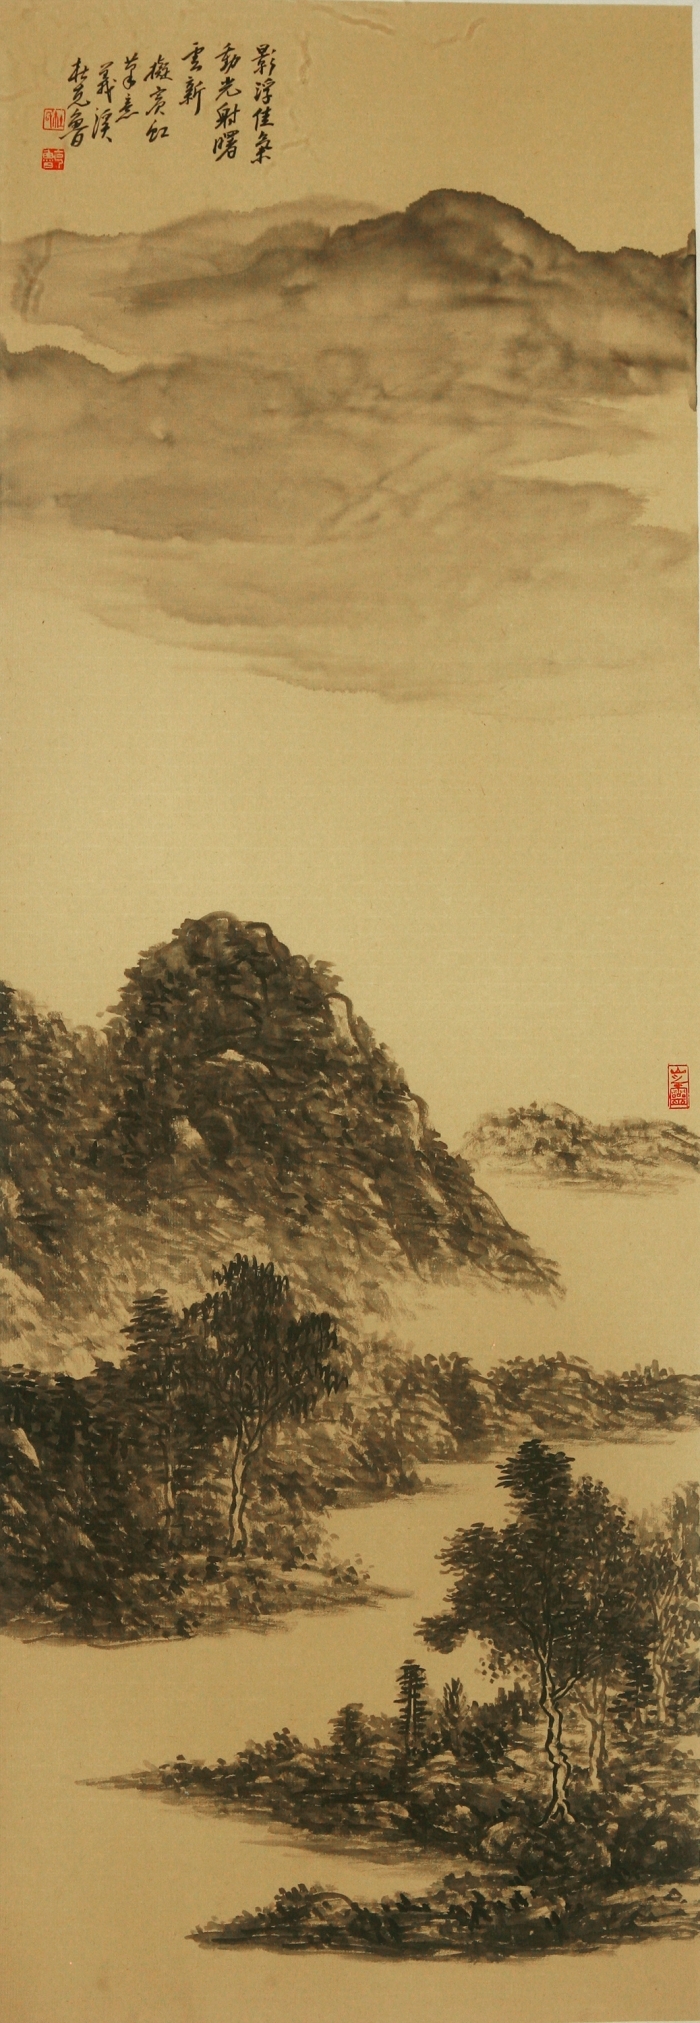 Hefeng Hall Gallery's Contemporary Chinese Painting - Learning form the Past 5